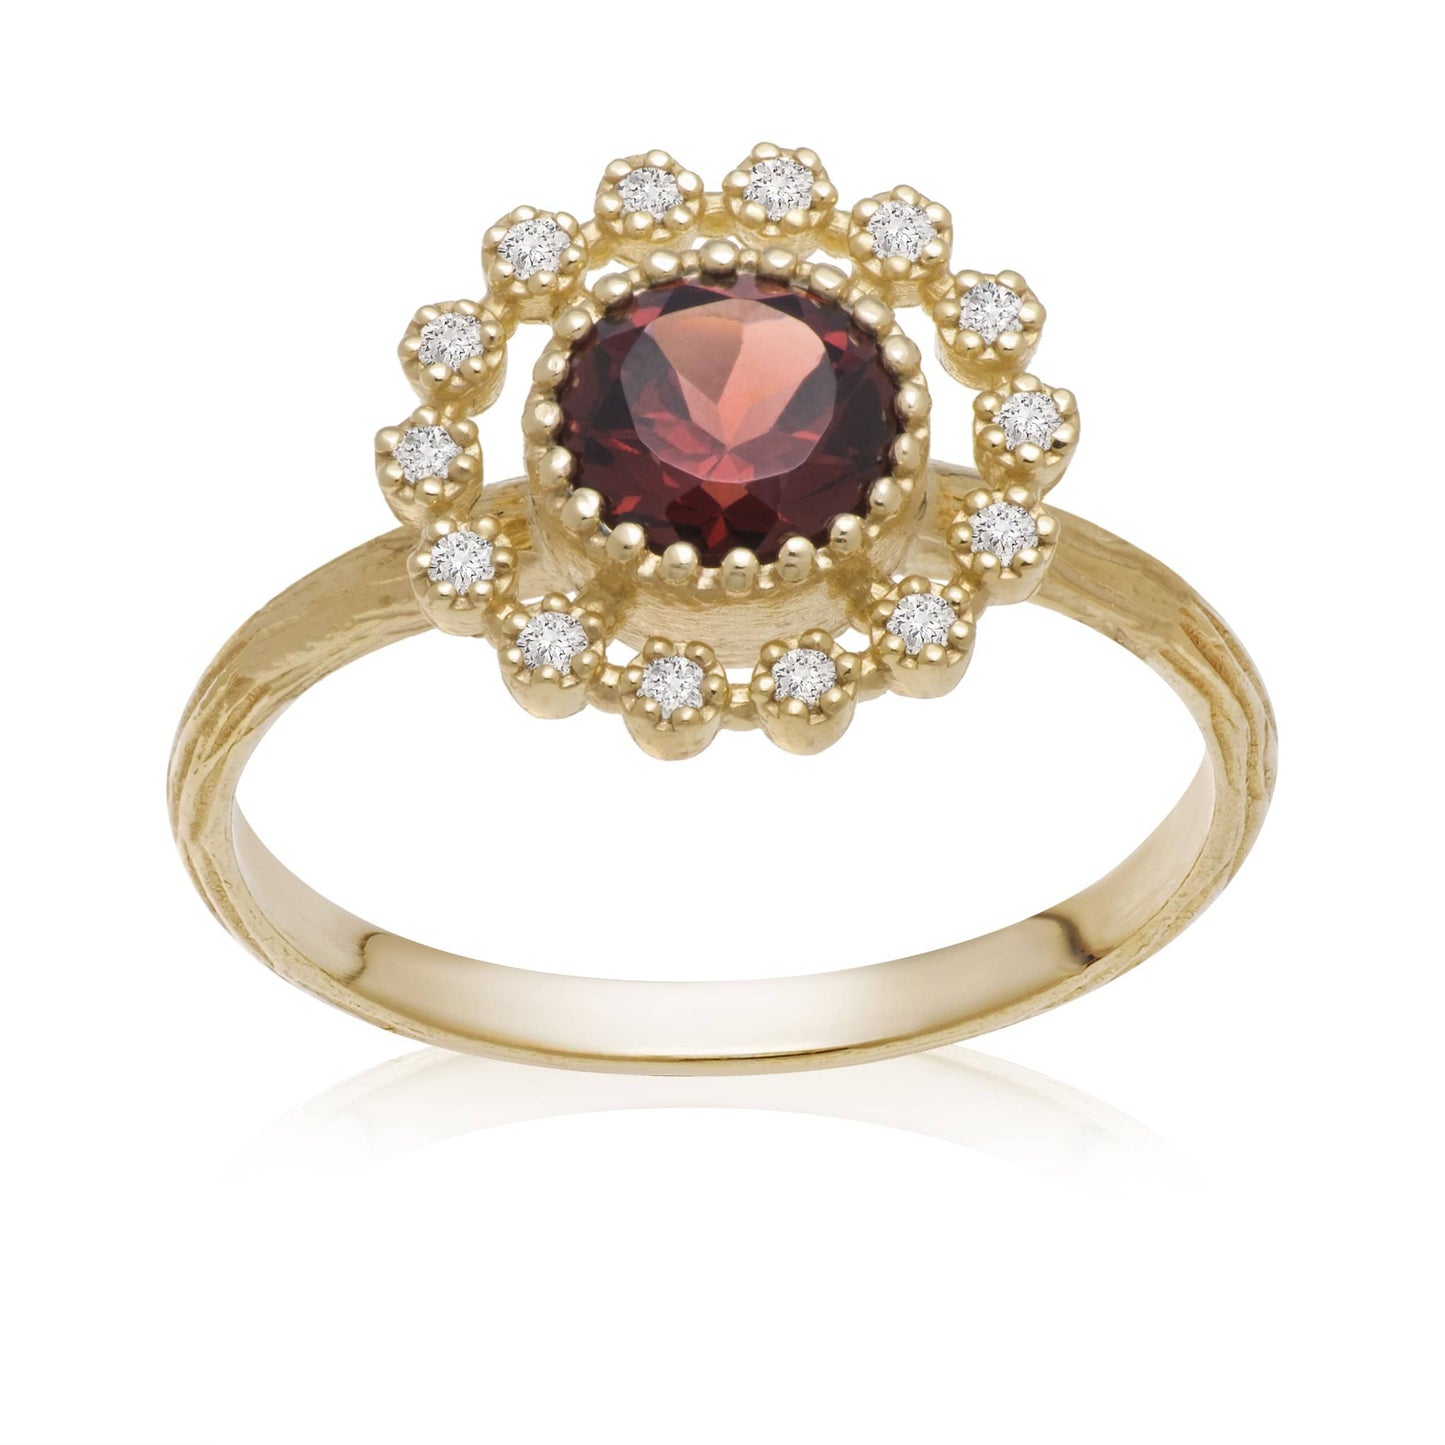 Dalia T Online Ring Lace Collection 14KT Yellow Gold Round Garnet & Diamond Ring